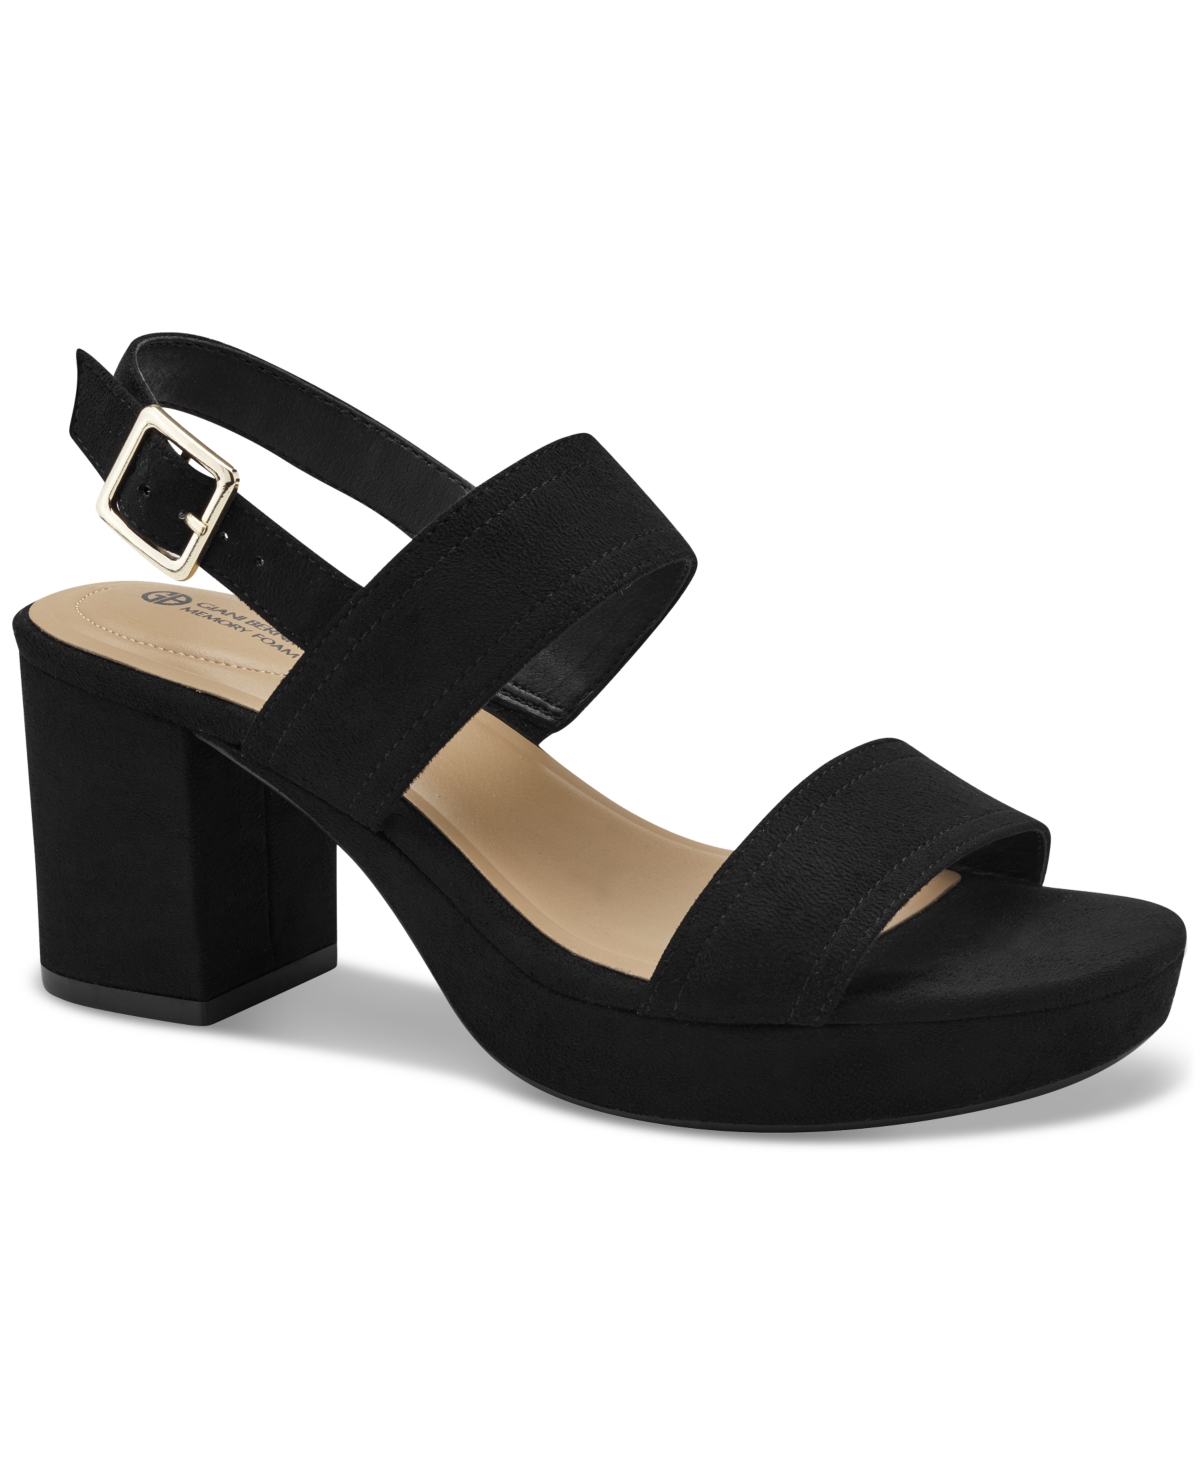 Women's Astridd Memory Foam Double Band Block Heel Sandals, Created for Macy's - Black Micro